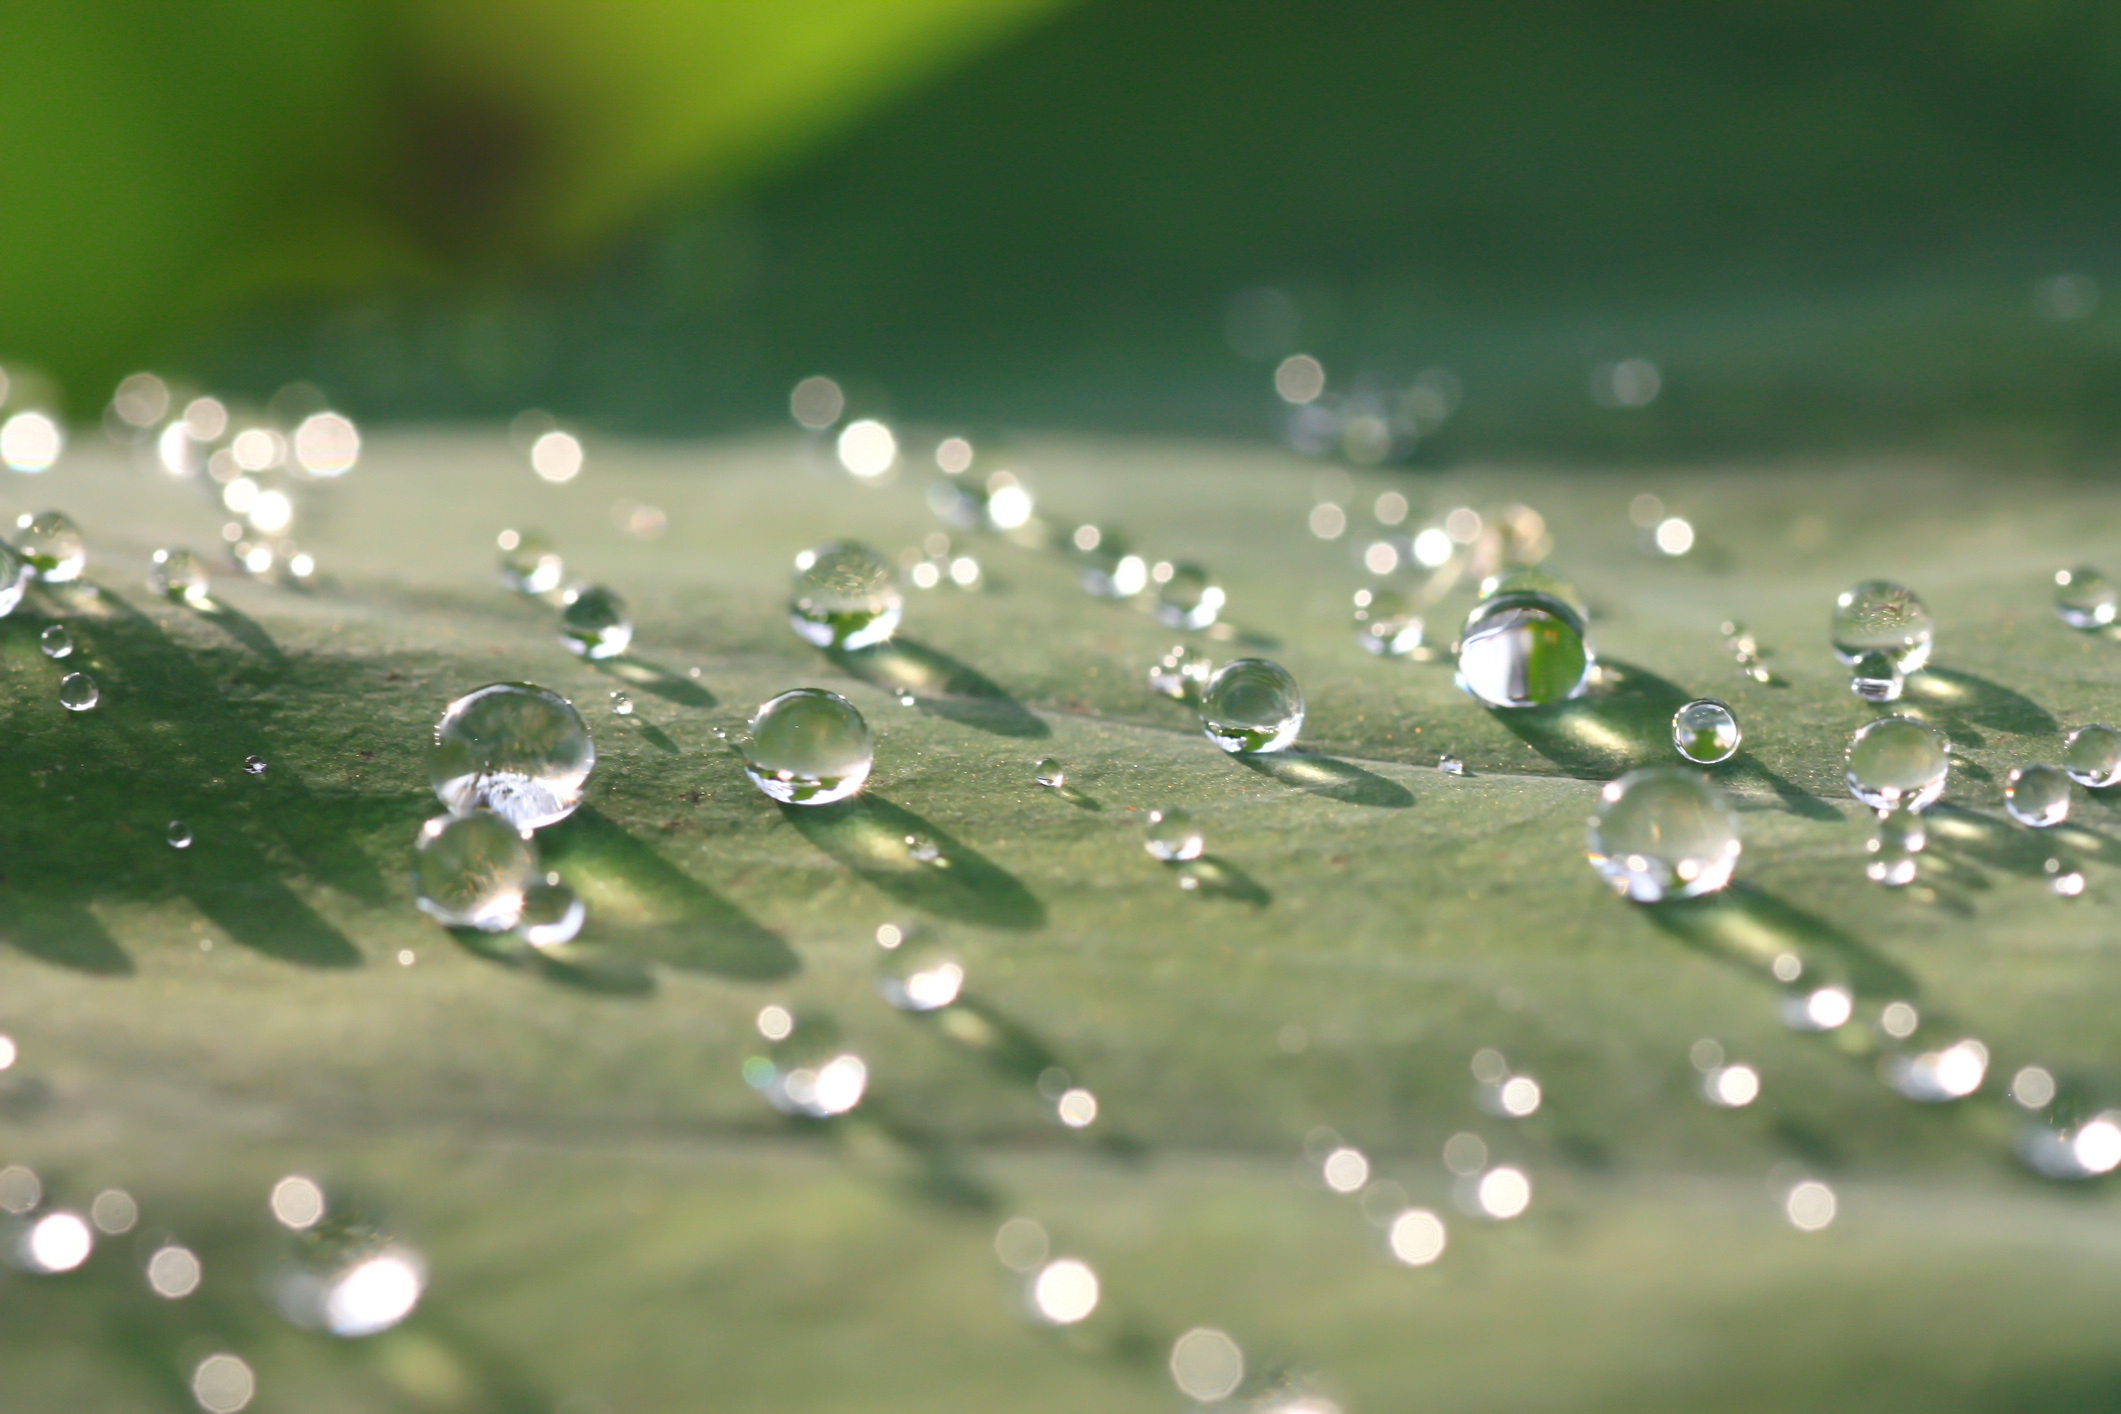 A leaf covered in water droplets